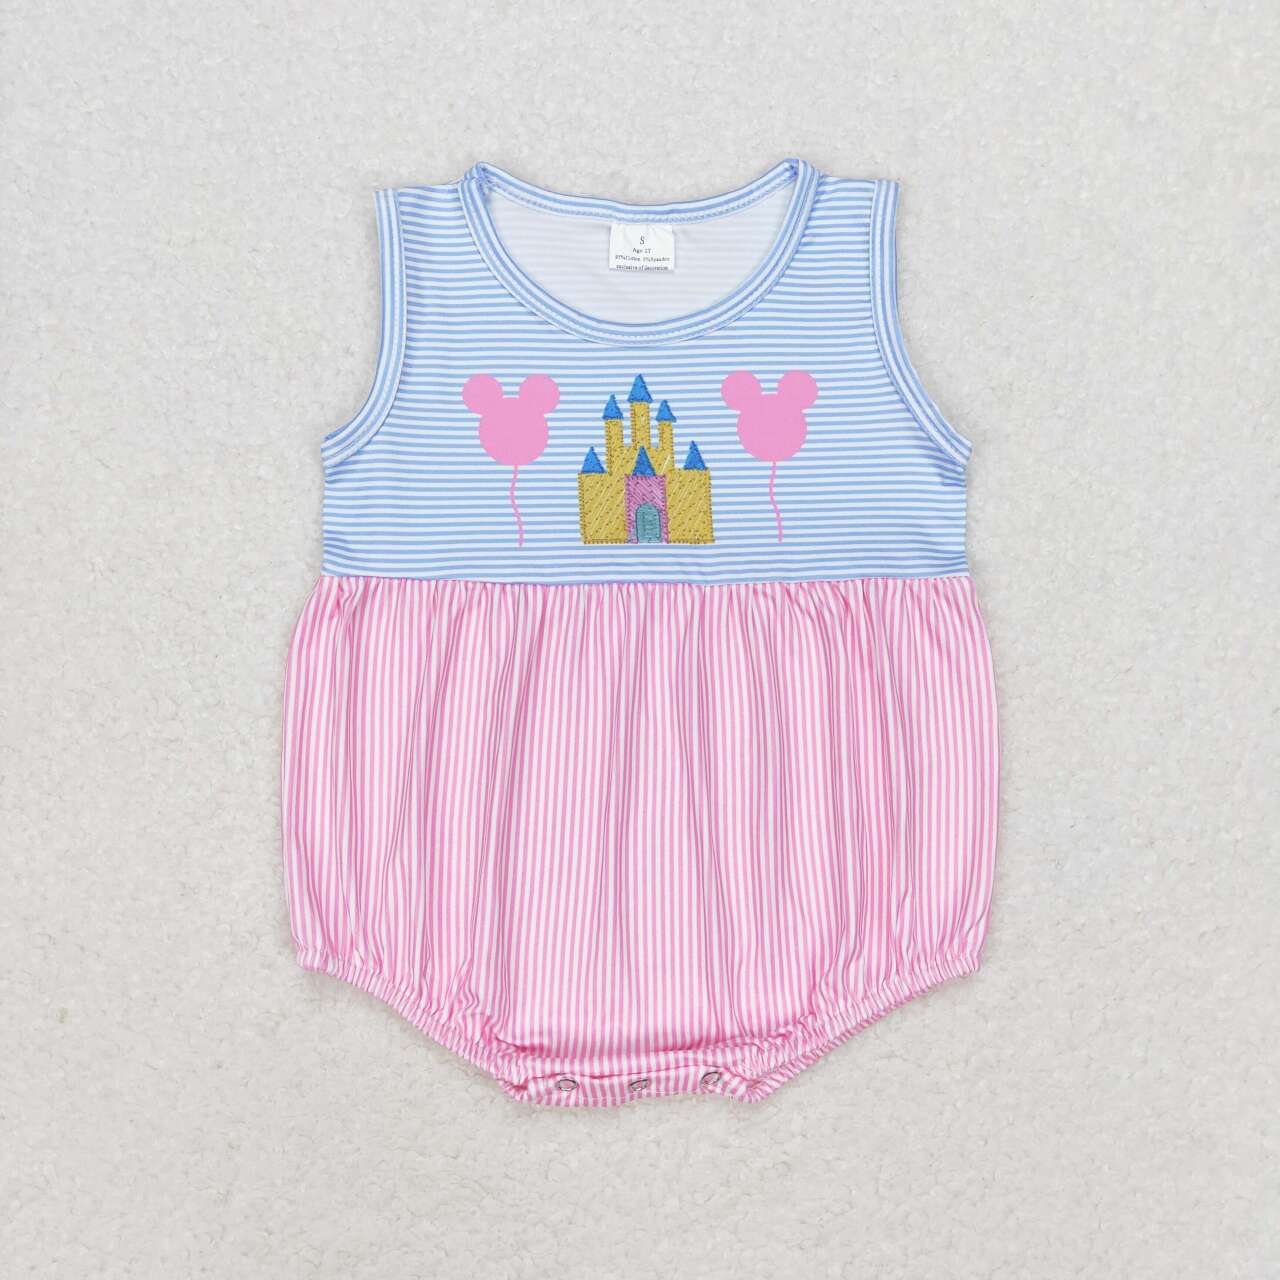 Cartoon Castle Print Sisters Summer Matching Clothes